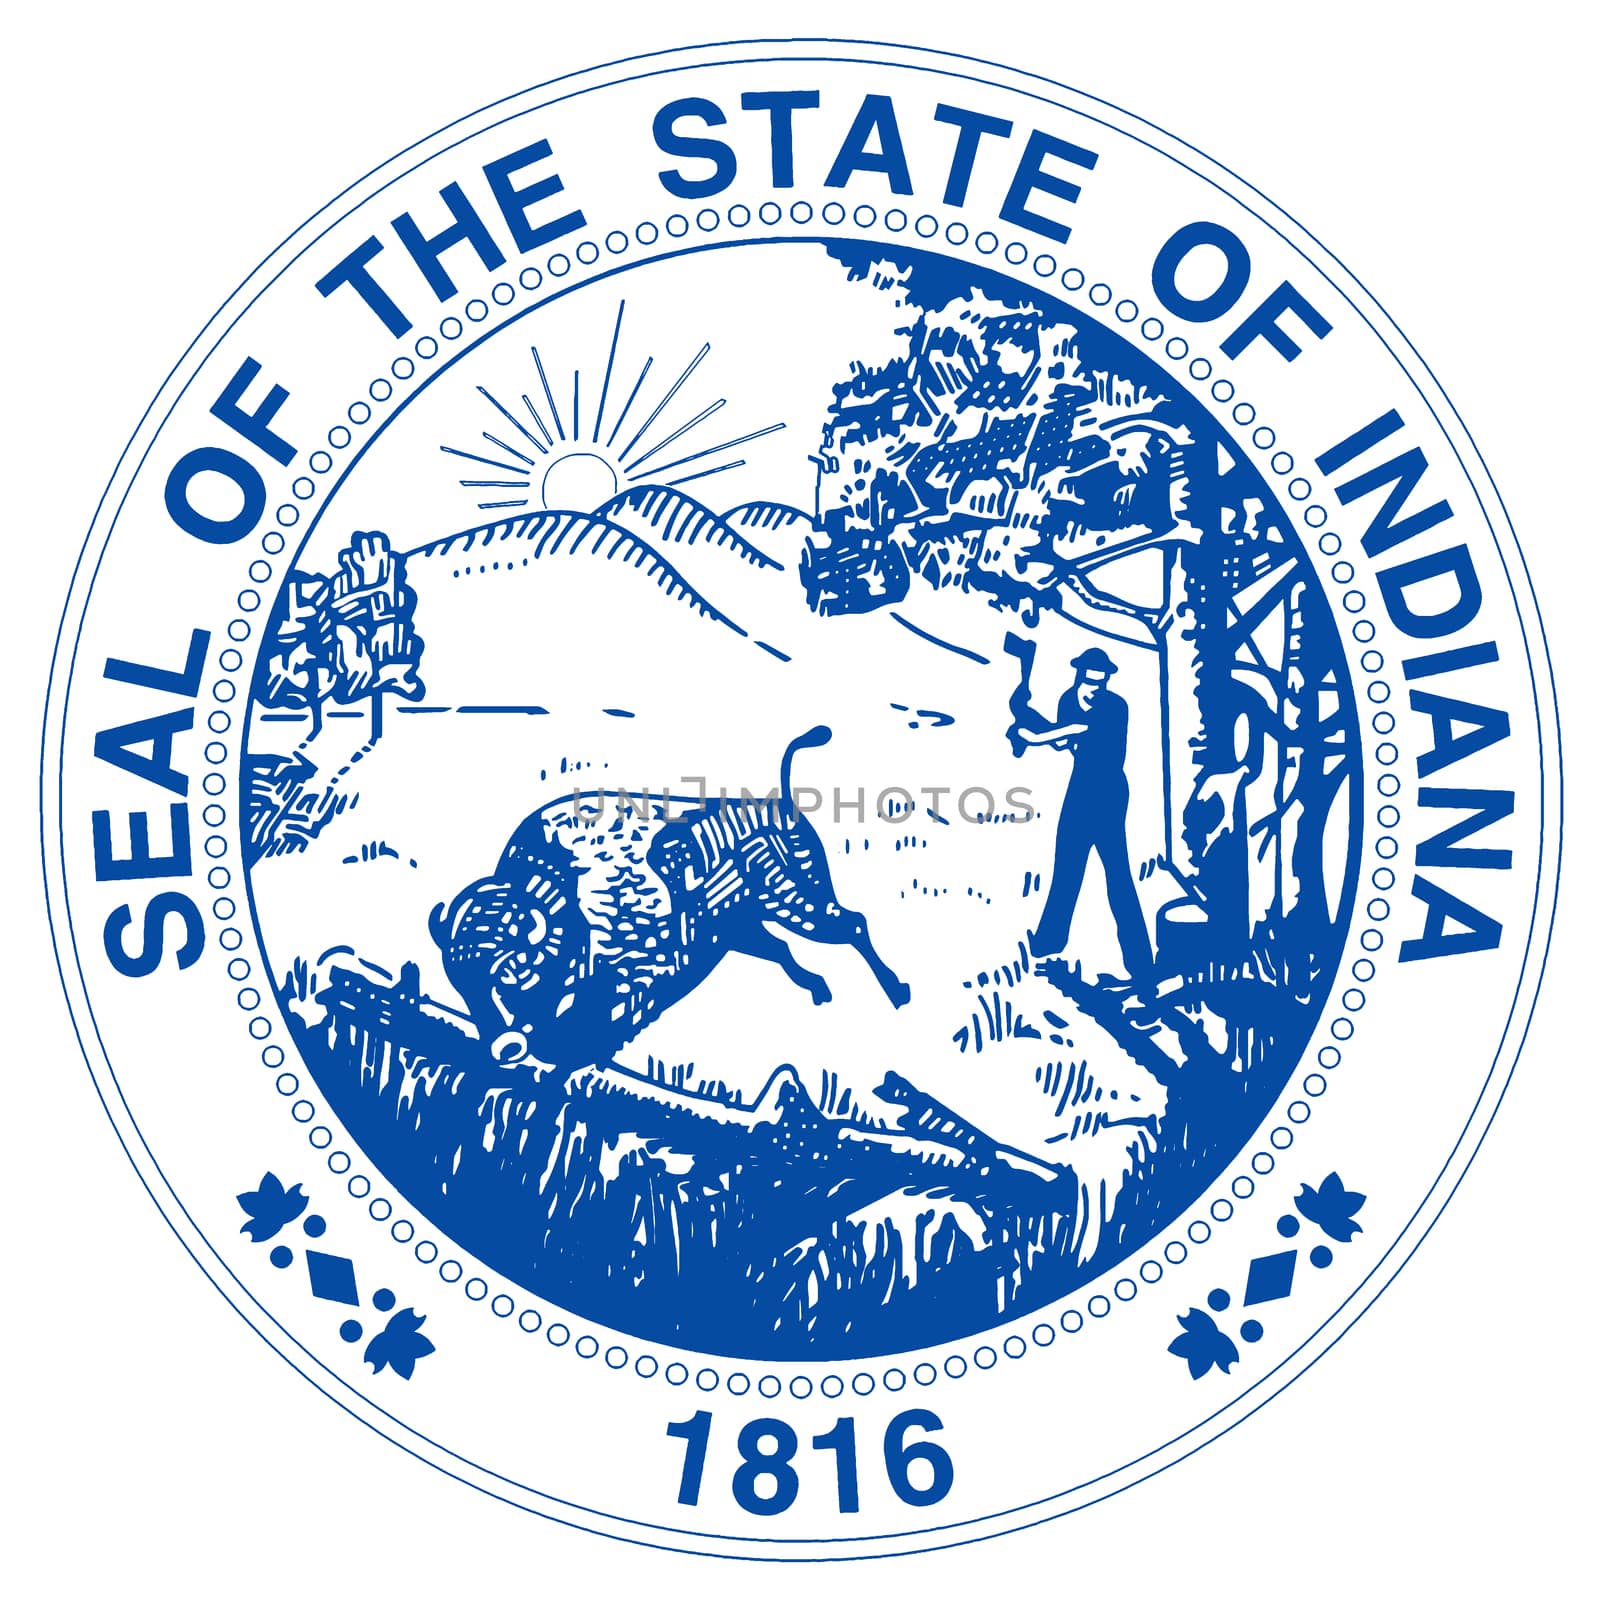 Indiana State Seal by Bigalbaloo